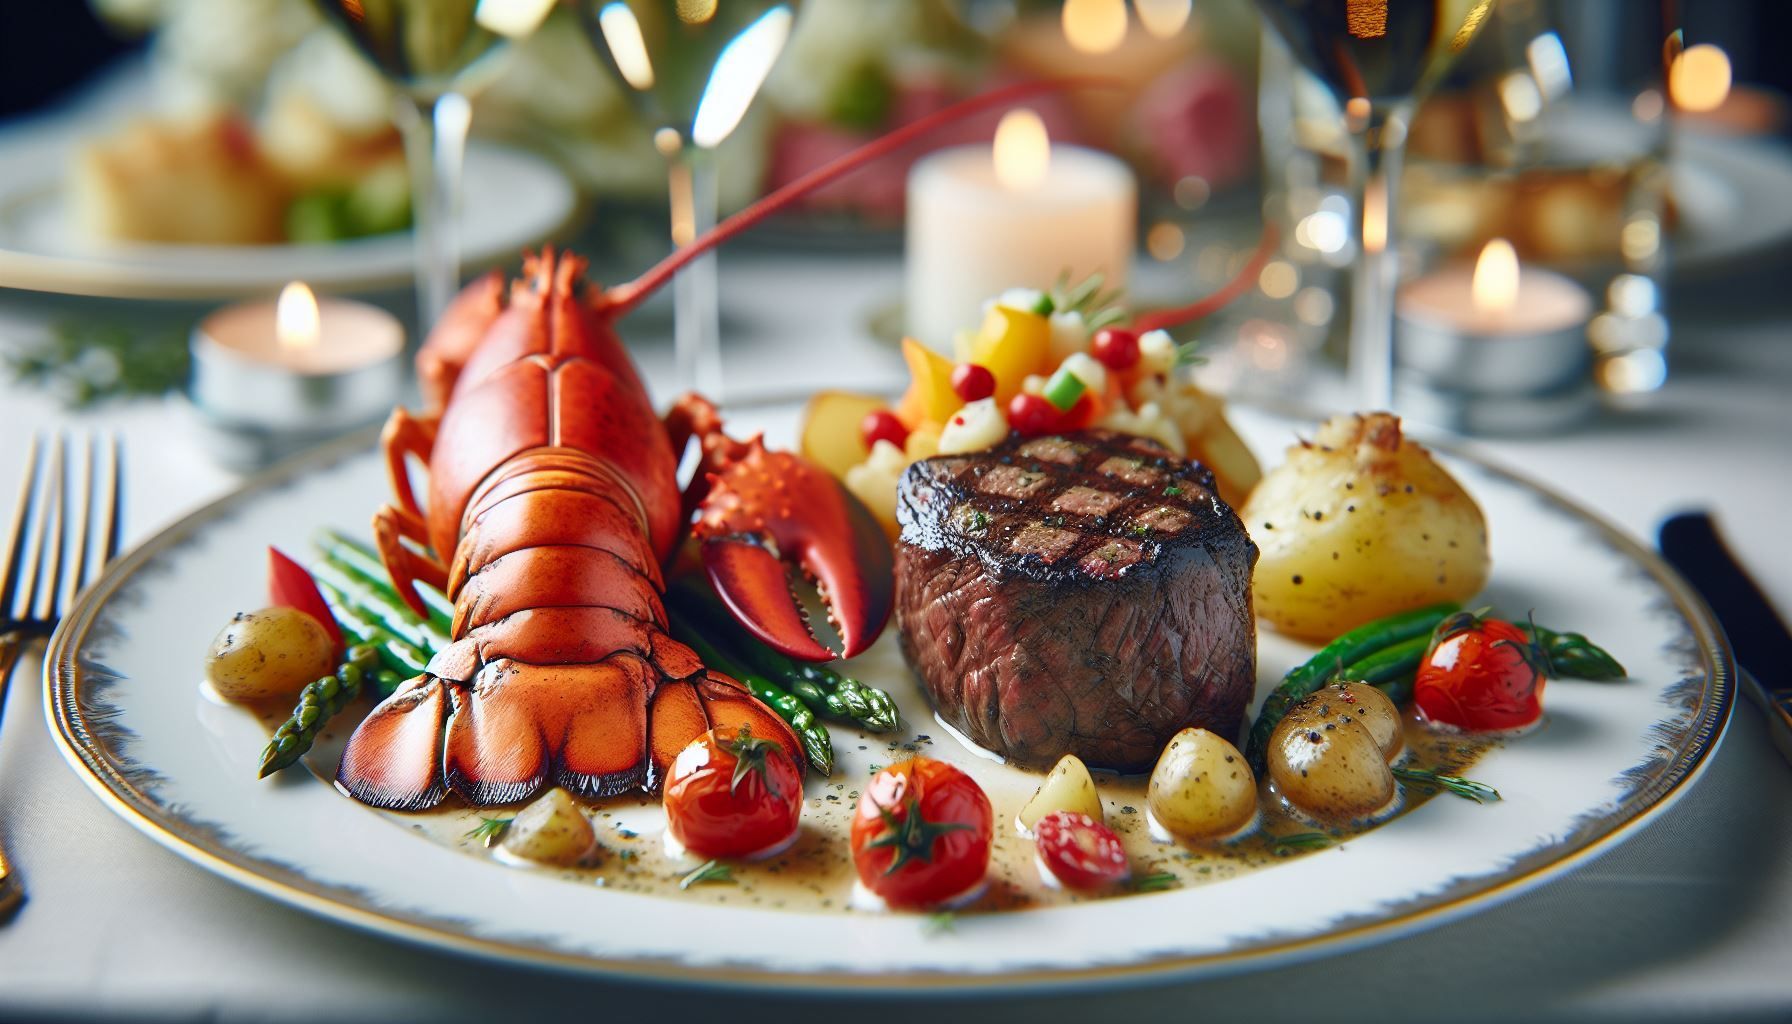 A plate of food with a lobster , steak and vegetables on a table.